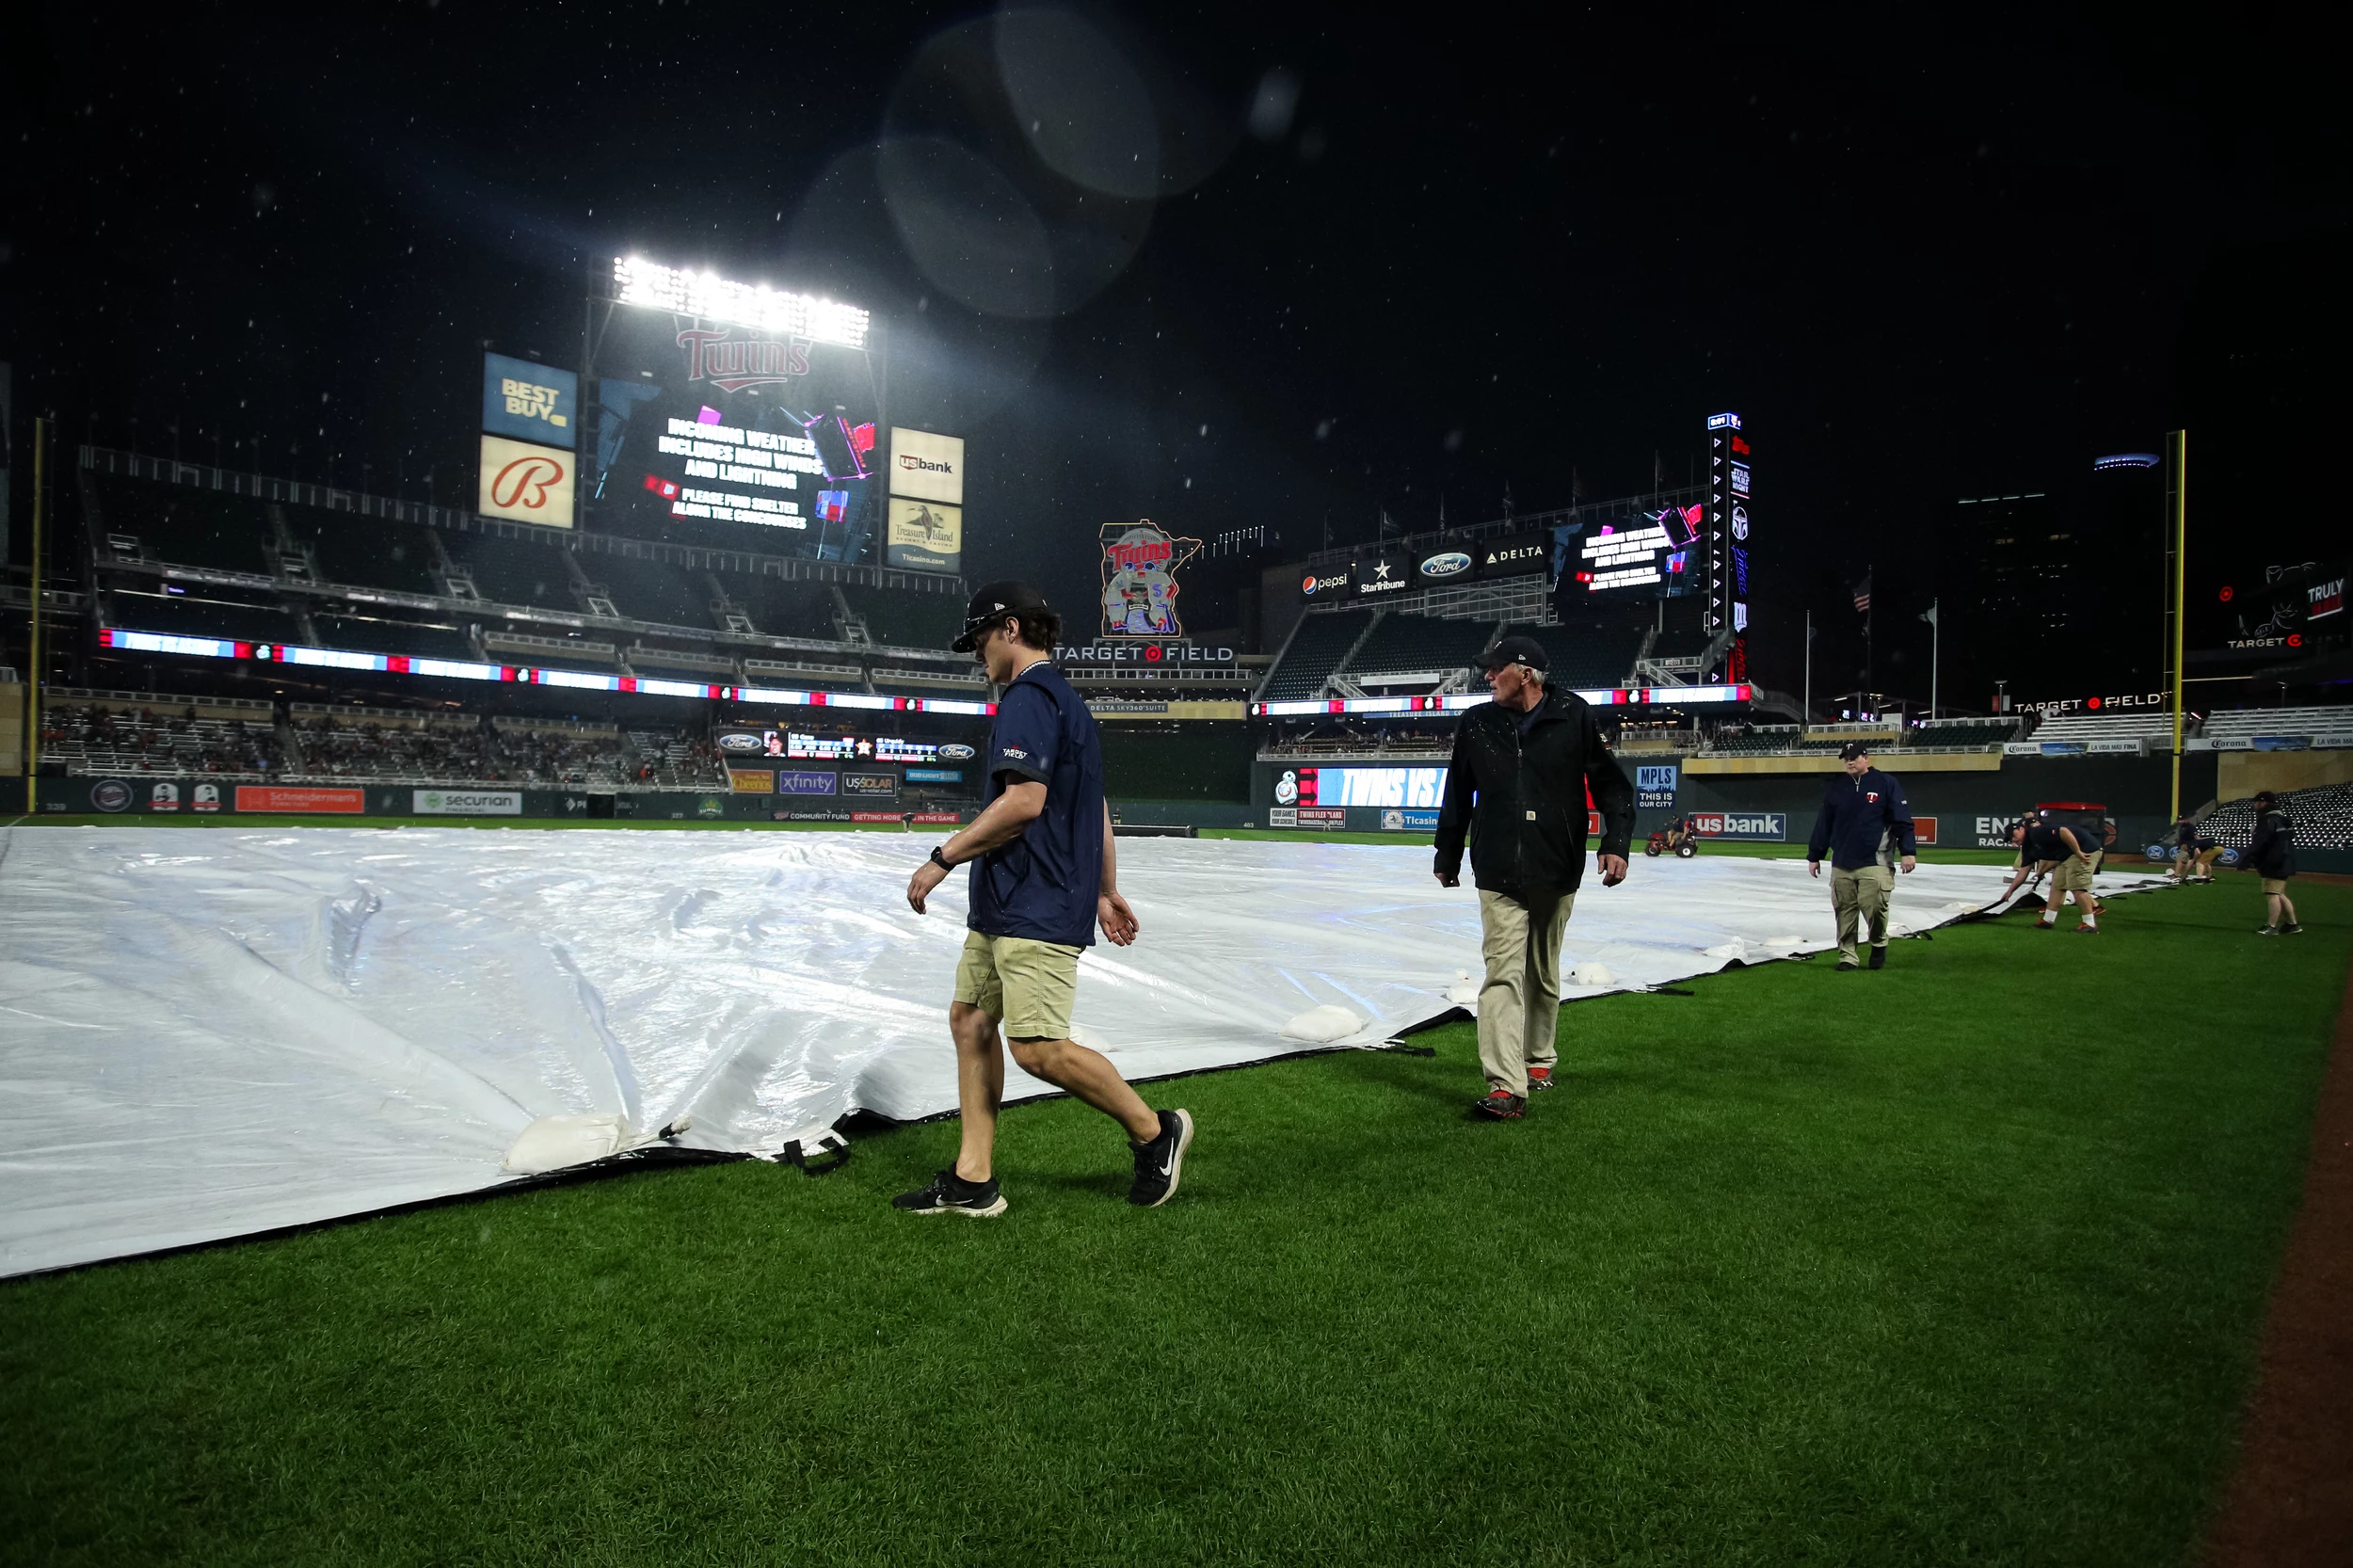 Twins vs. Astros suspended due to weather, to resume in 4th inning Thursday  North News - Bally Sports